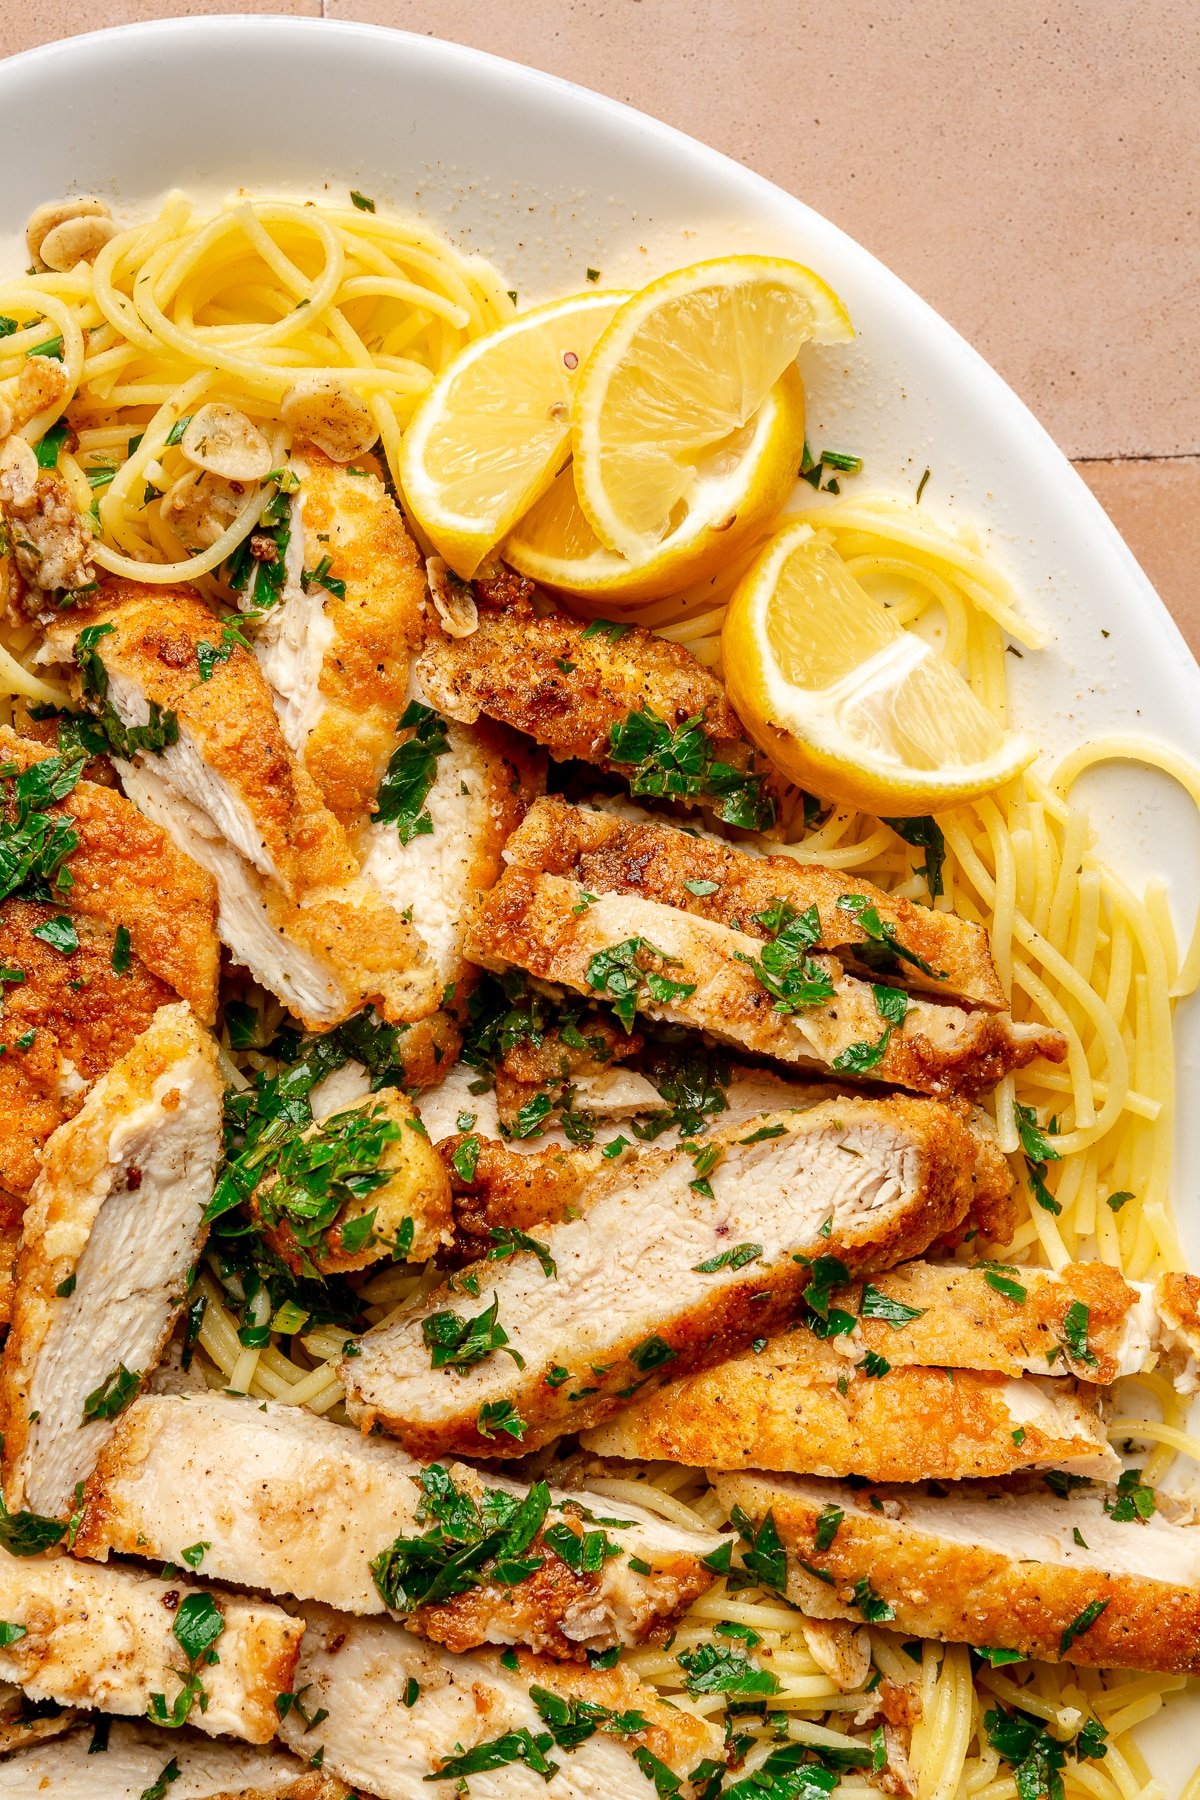 Chicken scampi sits on a bed of spaghetti on a white serving plate. Slices of lemon sit to the side.